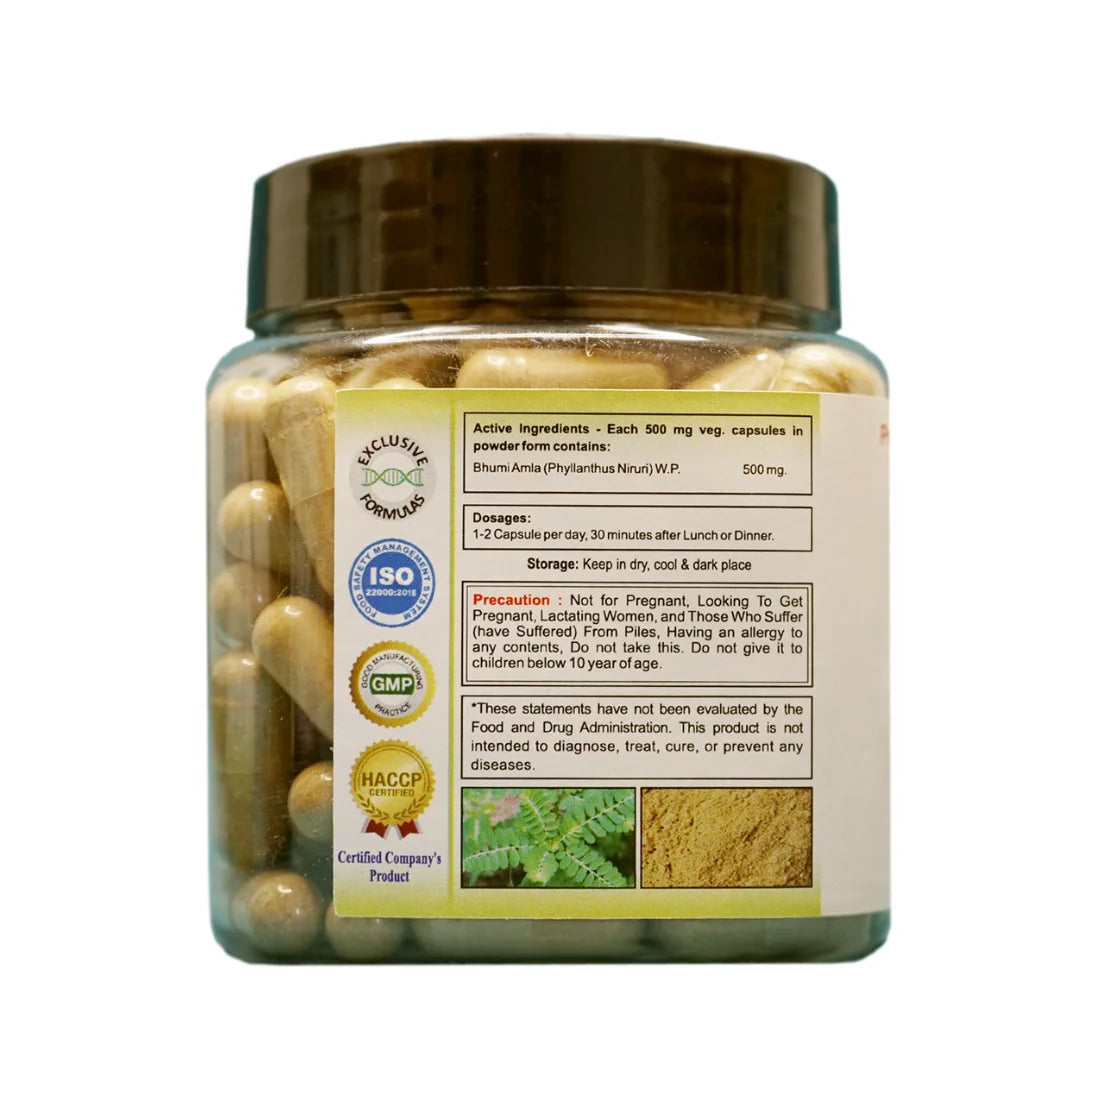 liver wellwisher capsule is top USA liver supplements supports body detox and liver cleanse